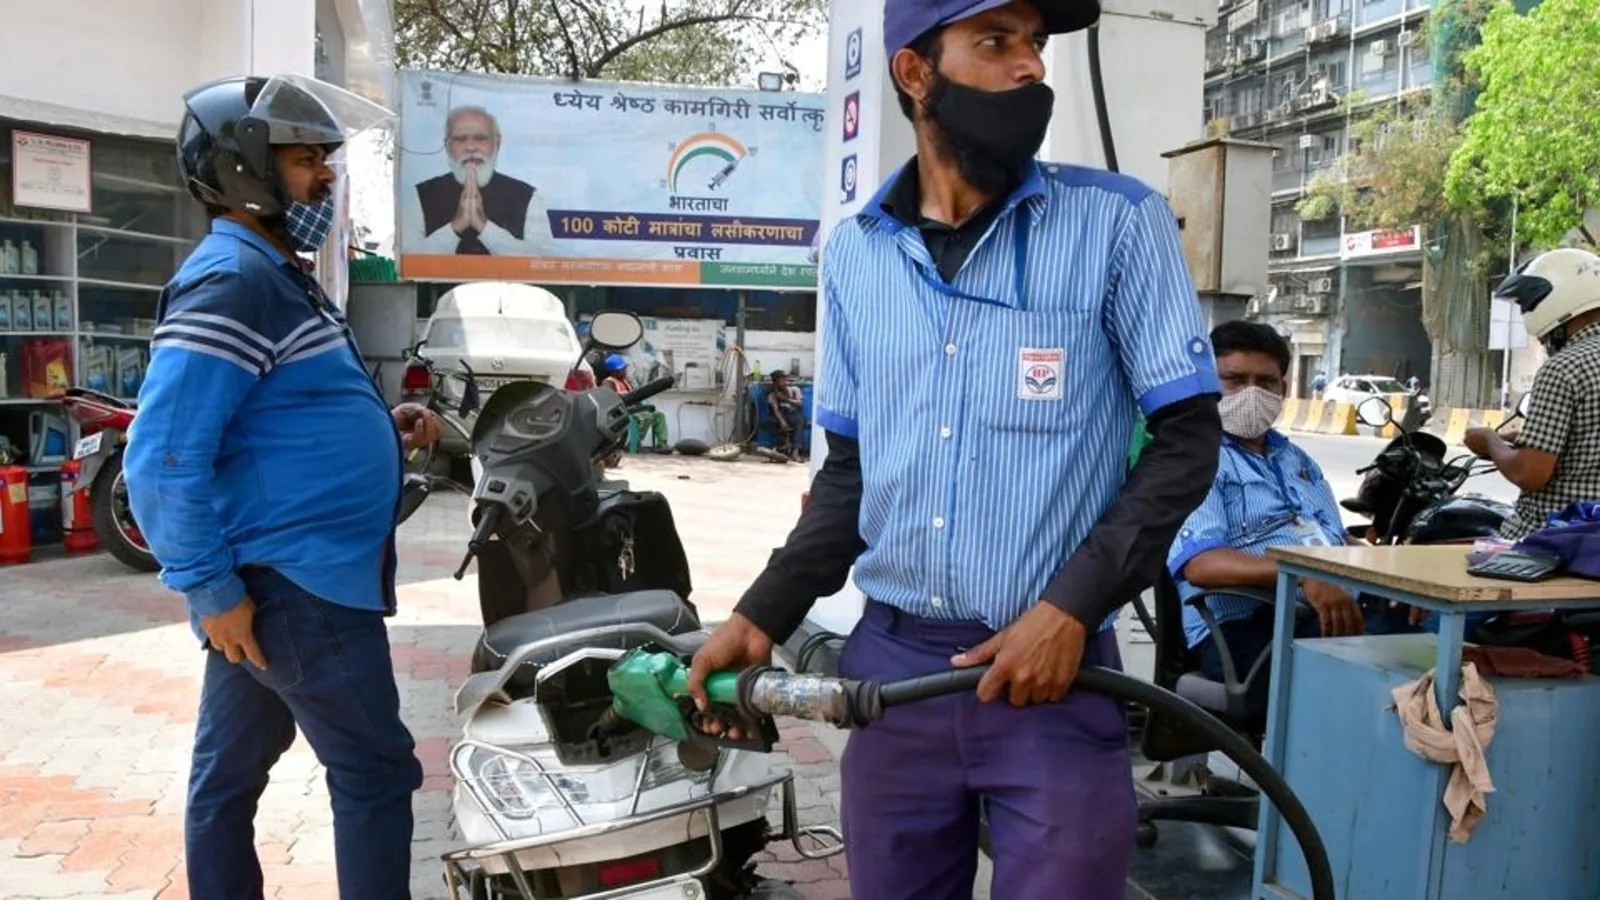 Petrol dealers’ body seeks redress for losses from Centre’s excise duty move